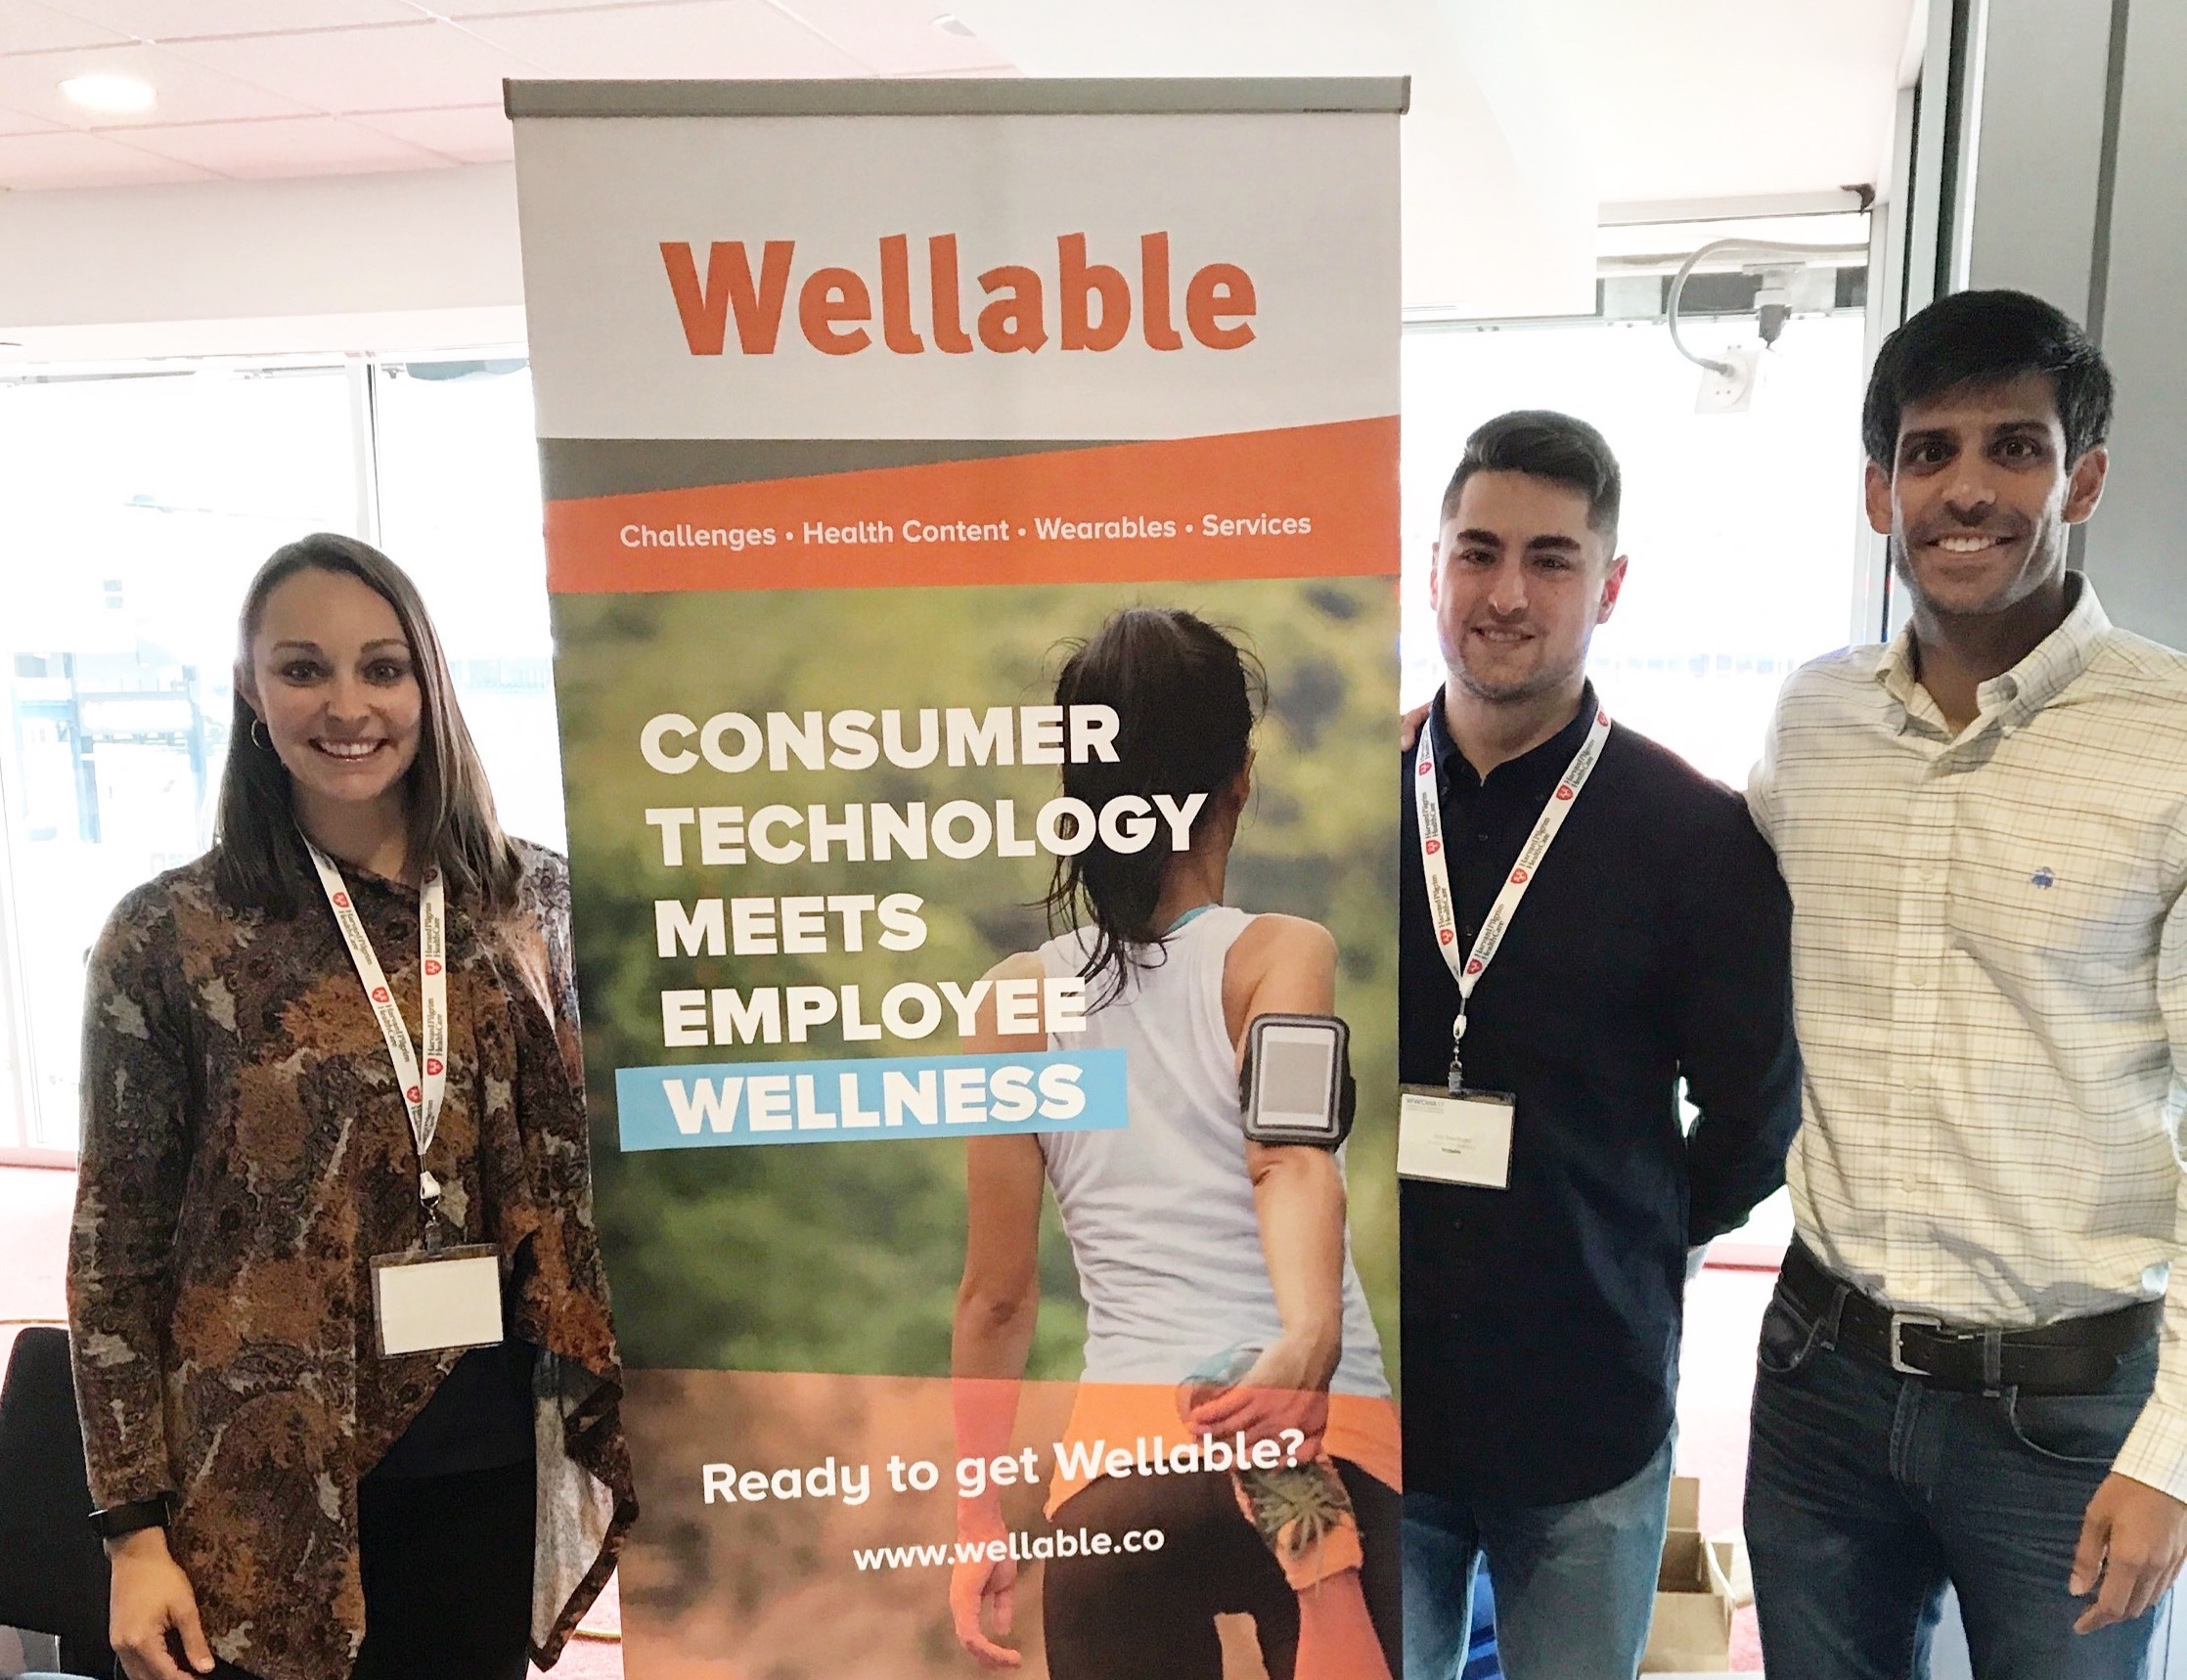 Members of the Wellable team, including Ashley Hopkins, Director of Wellness Program Success at Wellable, Inc. left, Nick Patel, President at Wellable, Inc., right. Photo courtesy of Hopkins.